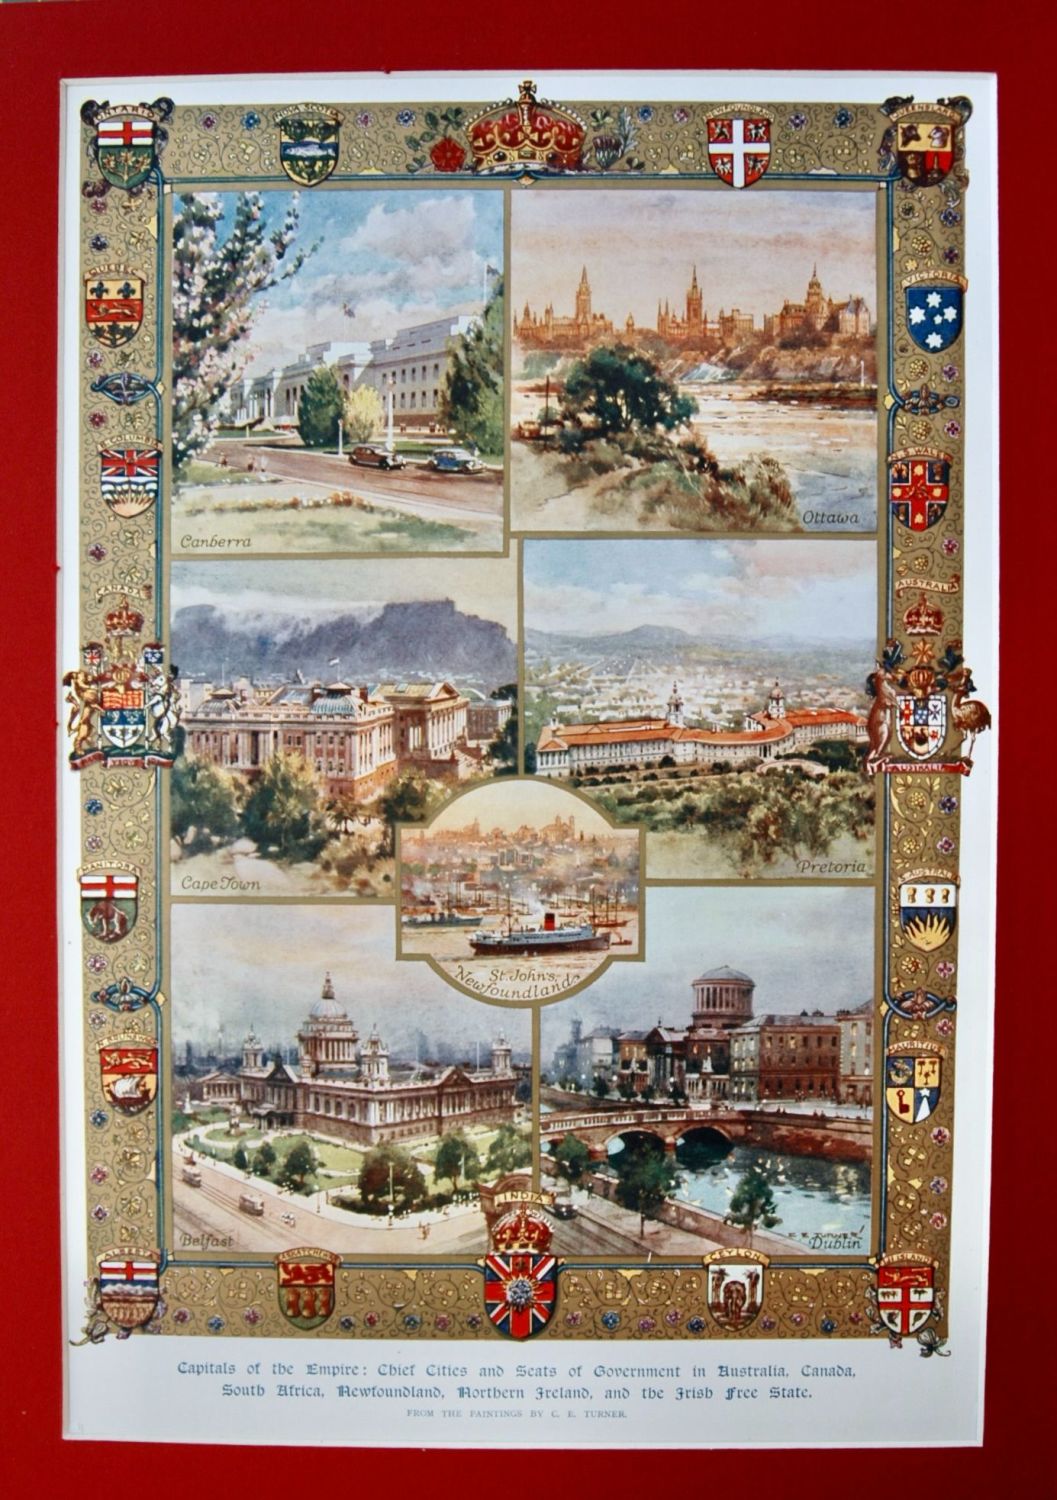 Capitals of the Empire :  Chief Cities and Seats of Government in Australia